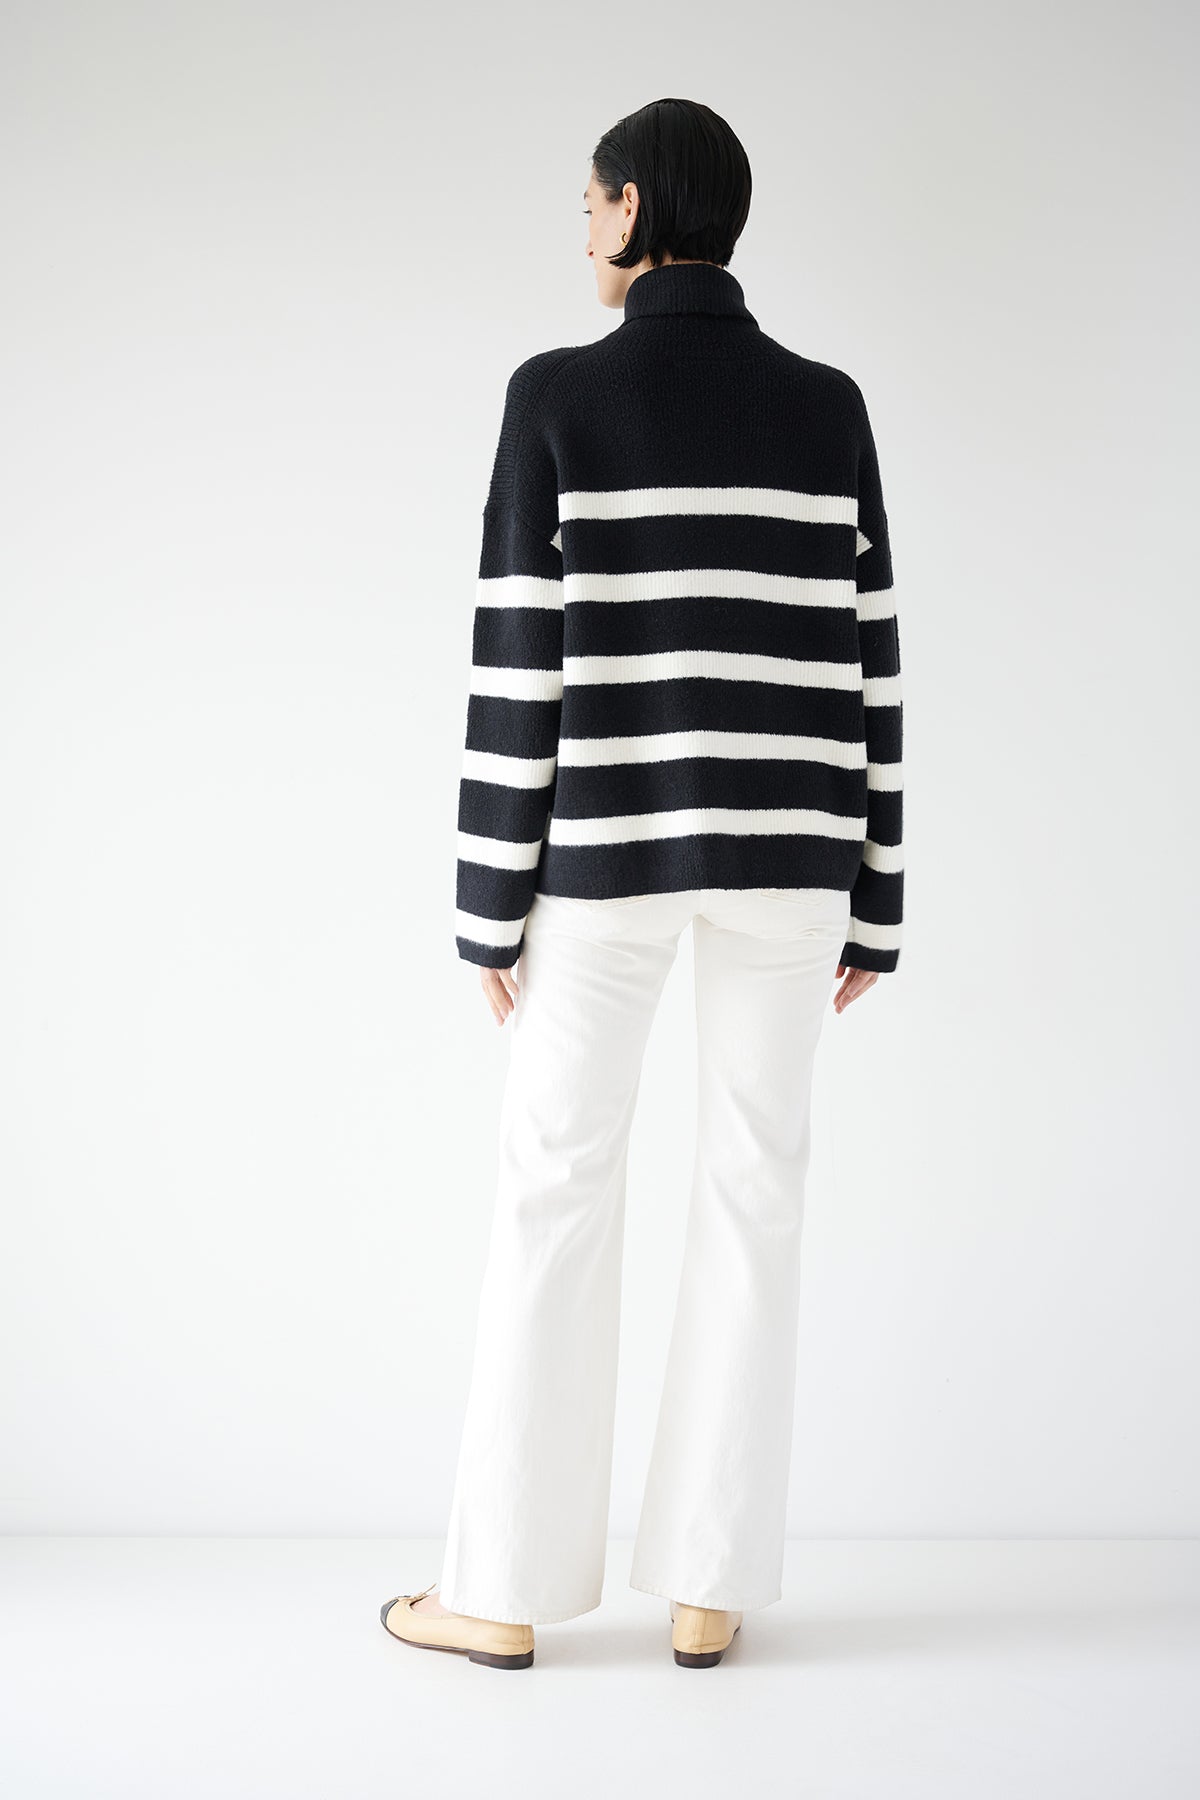 The back view of a woman wearing an oversized ENCINO SWEATER in a black and white striped pattern, by Velvet by Jenny Graham.-35547404861633